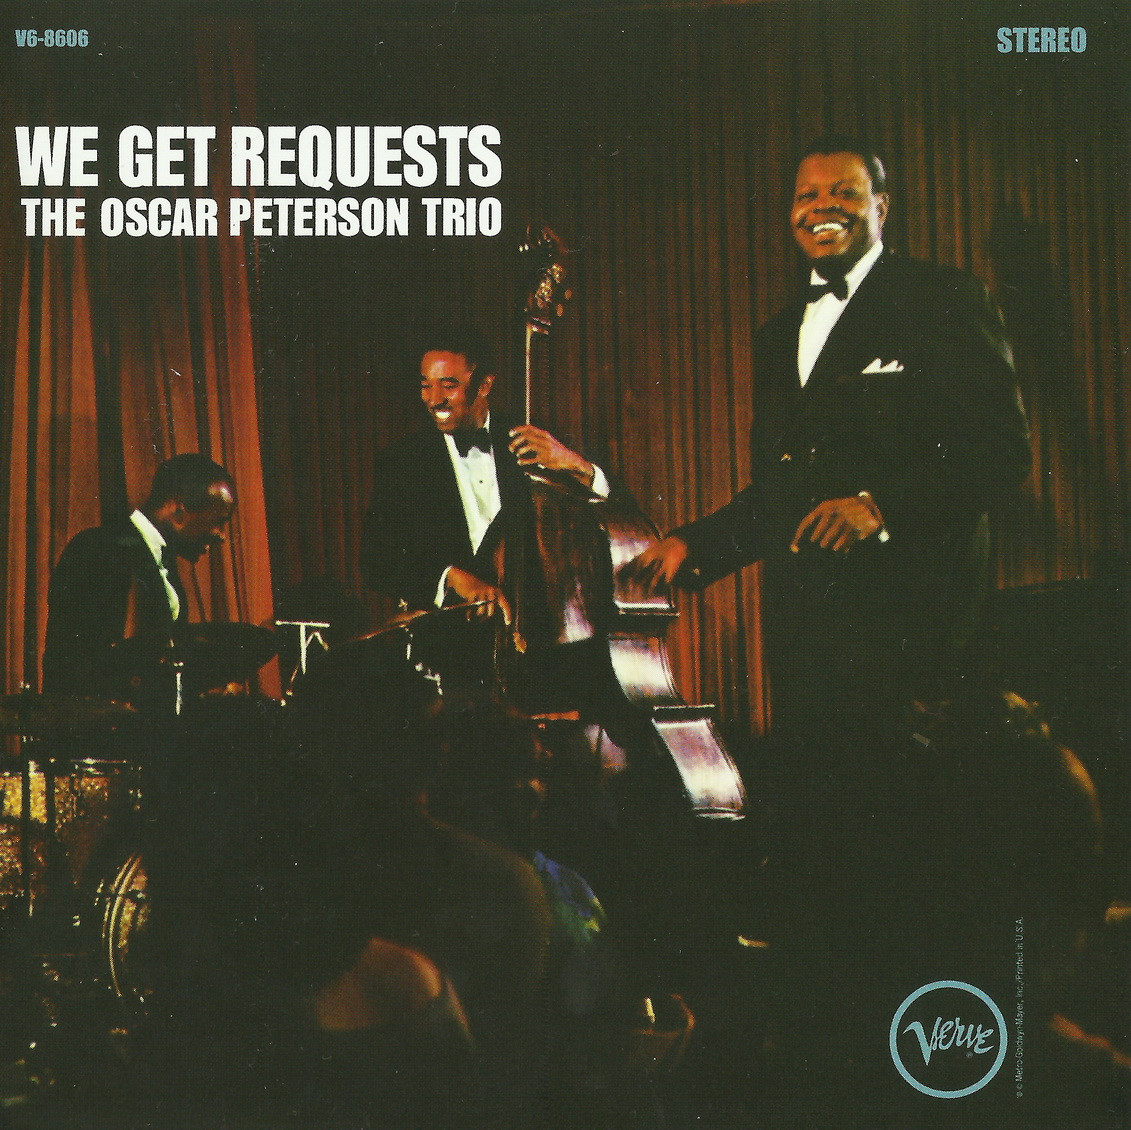 Oscar Peterson Trio – We Get Requests (1964) [Analogue Productions 2011] MCH SACD ISO + Hi-Res FLAC